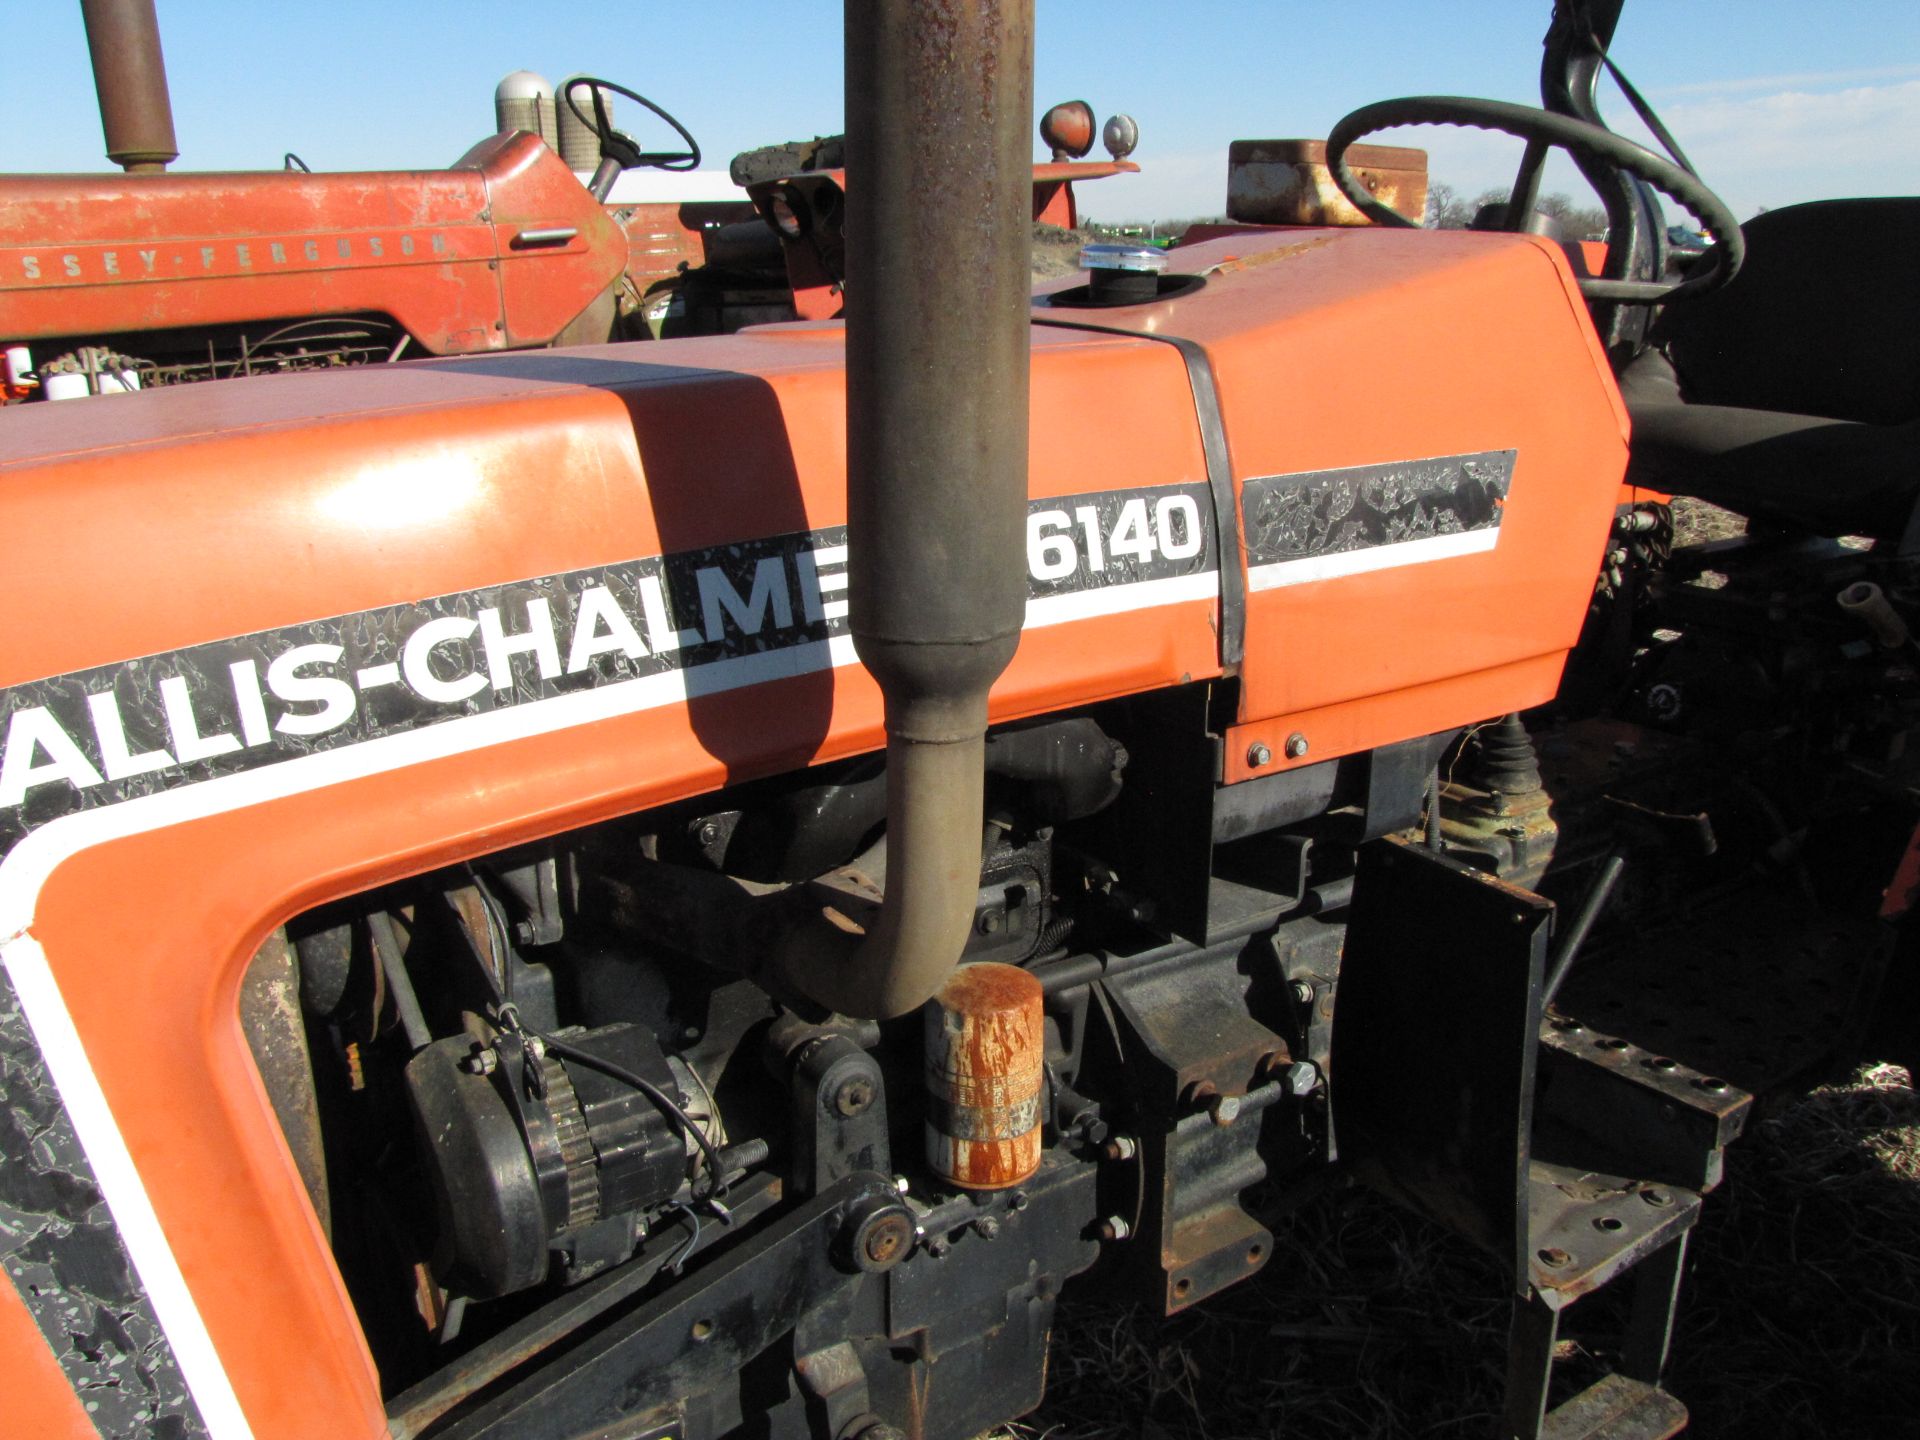 Allis-Chalmers 6140 Tractor - Image 15 of 43